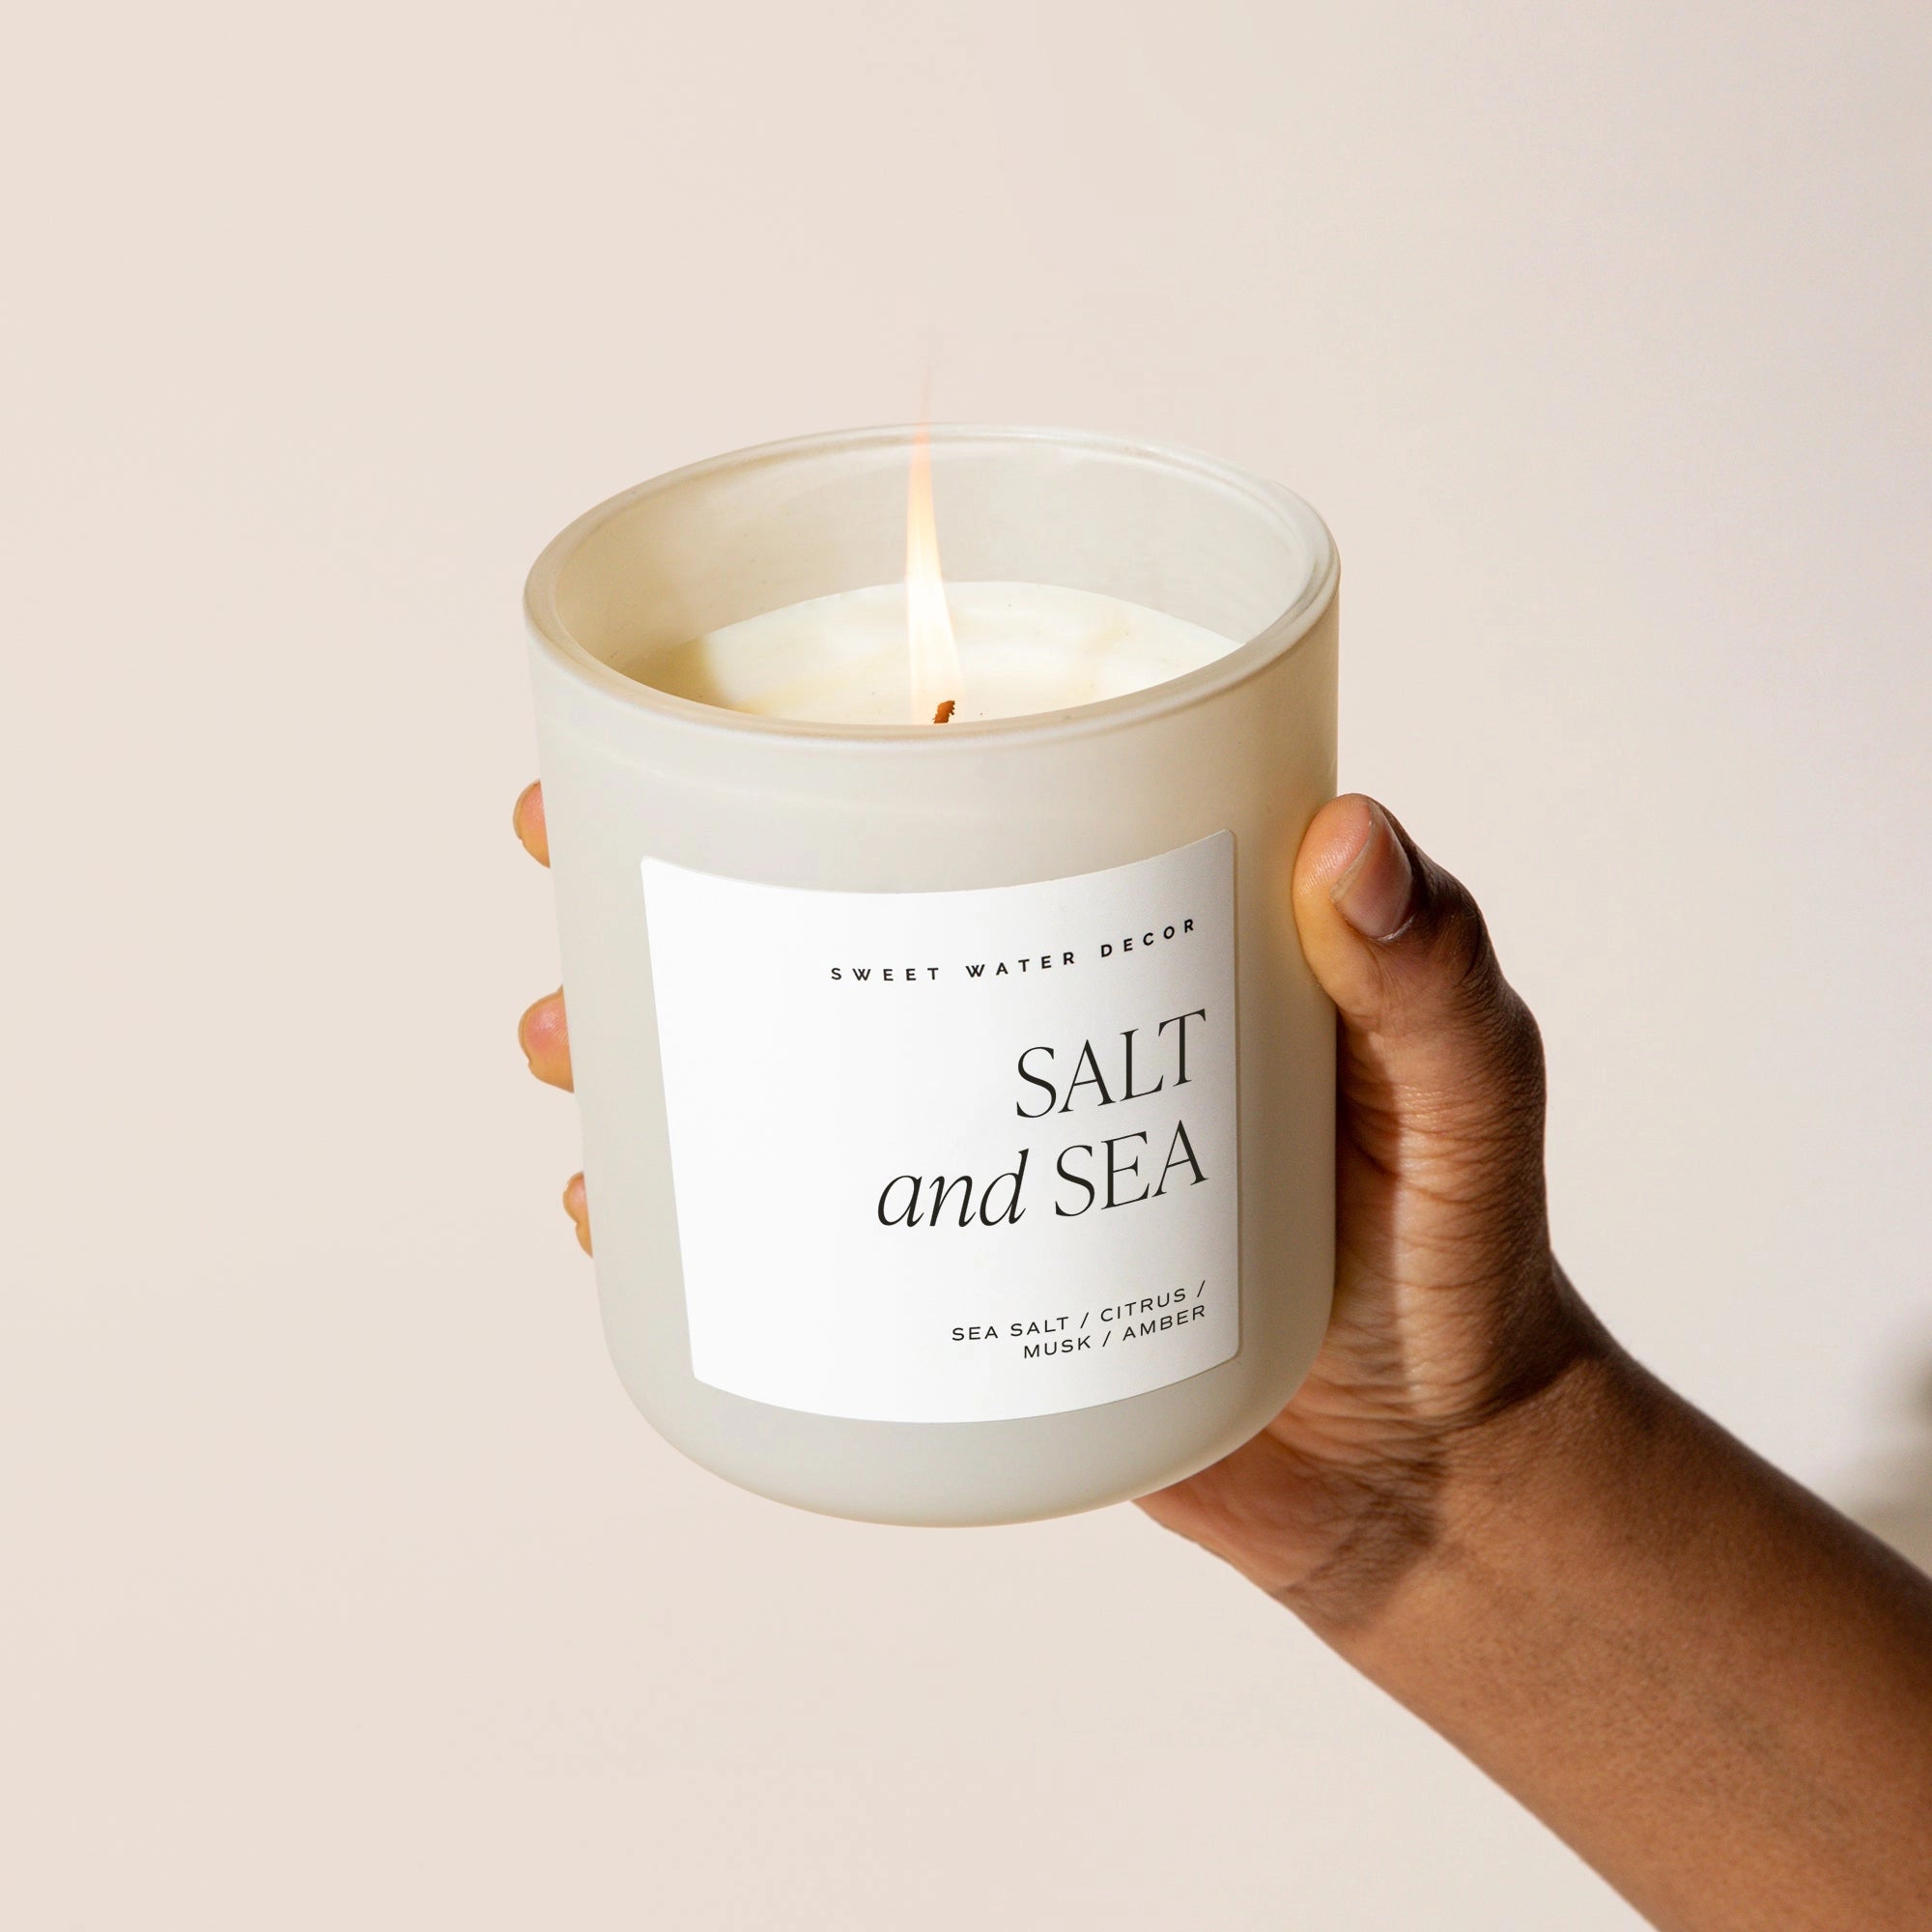 Salt and sea soy candle in white matt jar, held up and lit.